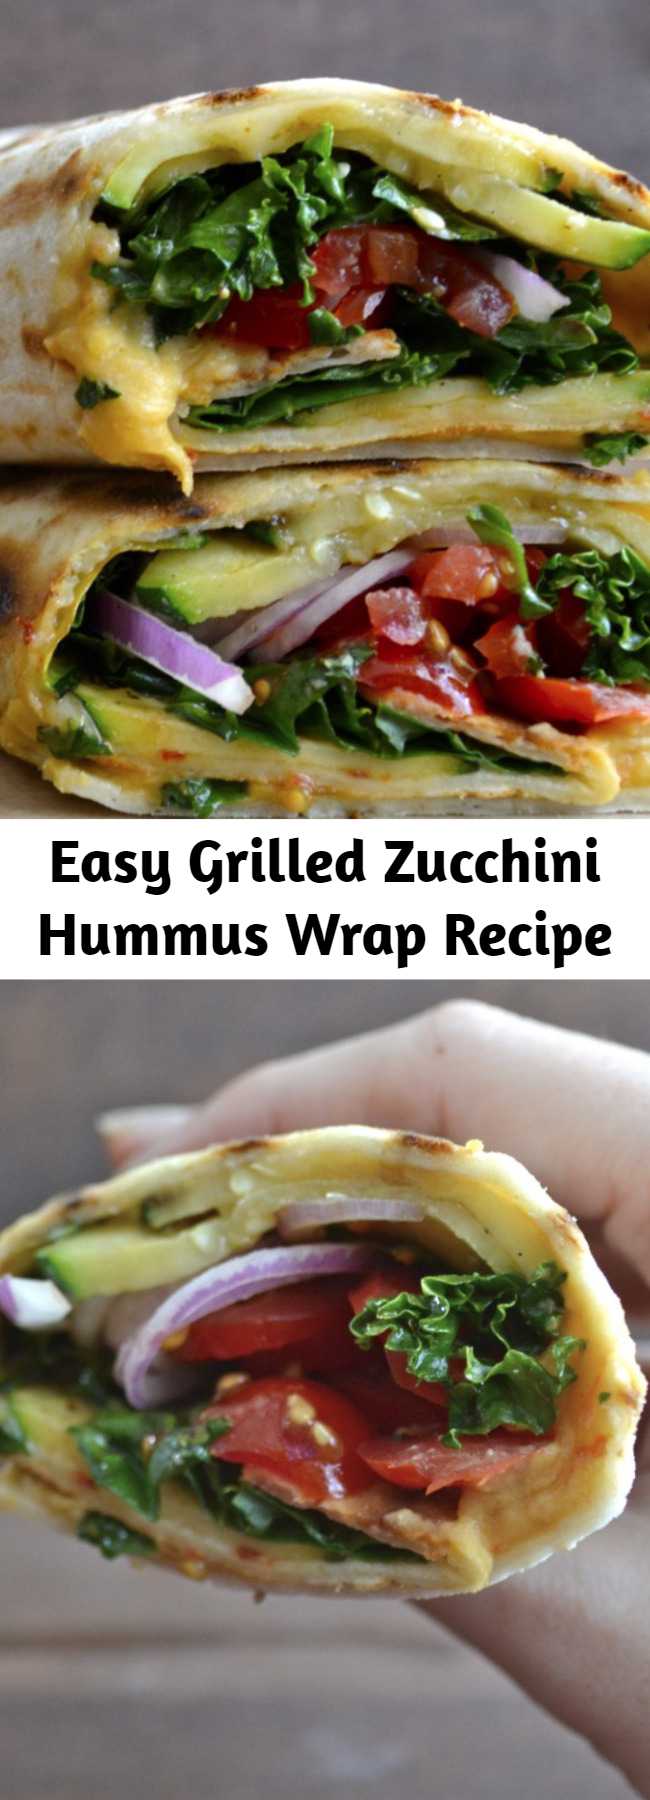 Easy Grilled Zucchini Hummus Wrap Recipe - Fresh veggies are grilled to perfection and packed in this Grilled Zucchini Hummus Wrap! This is the perfect easy, healthy wrap recipe!